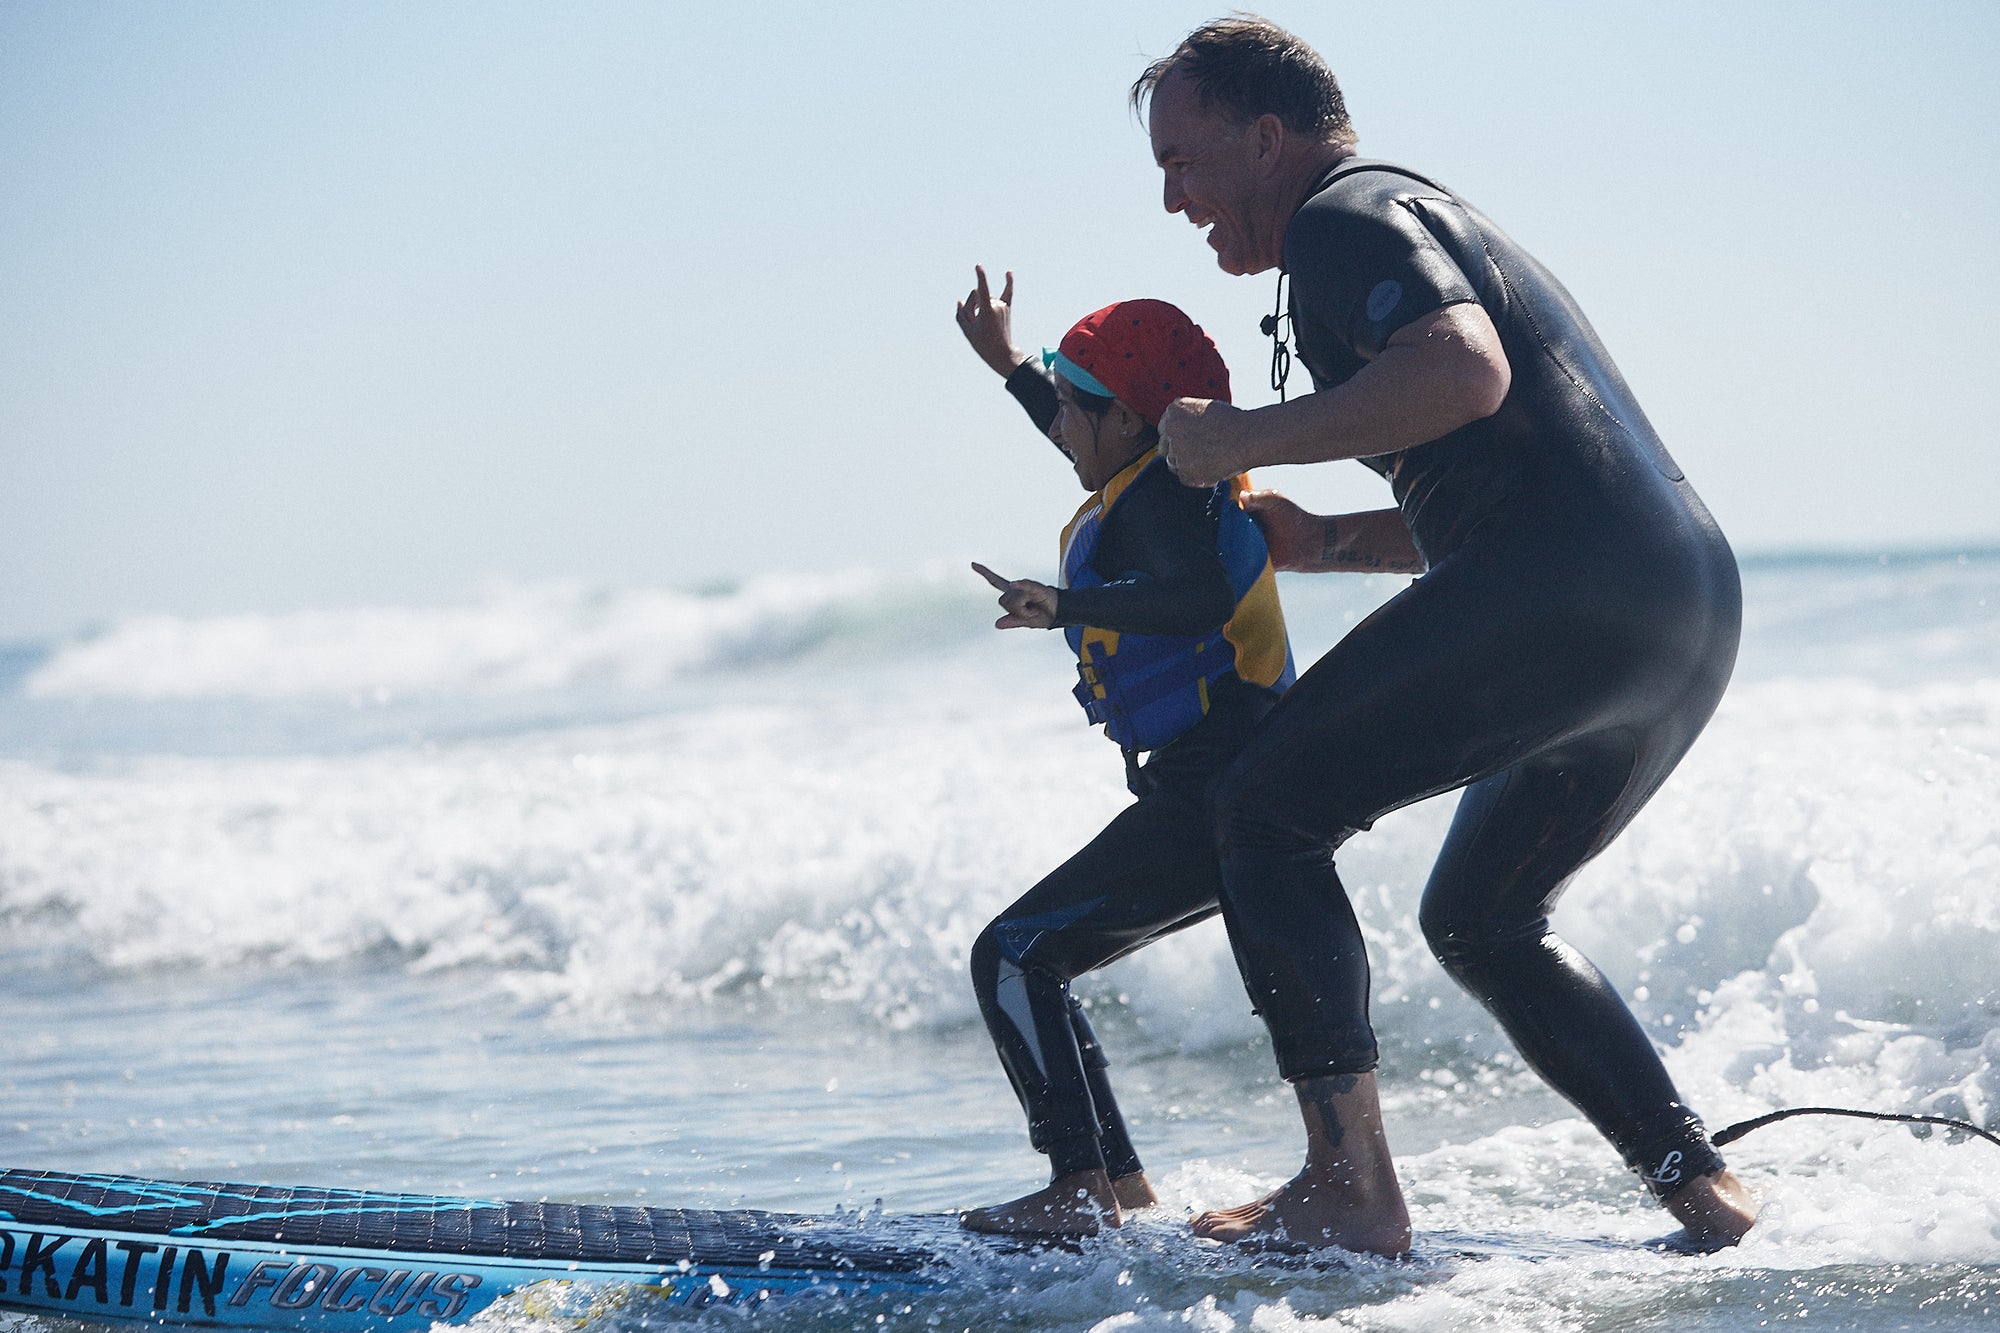 RECAP: Katin Hosted AWOW Surf Therapy Event Last Weekend In Bolsa Chica